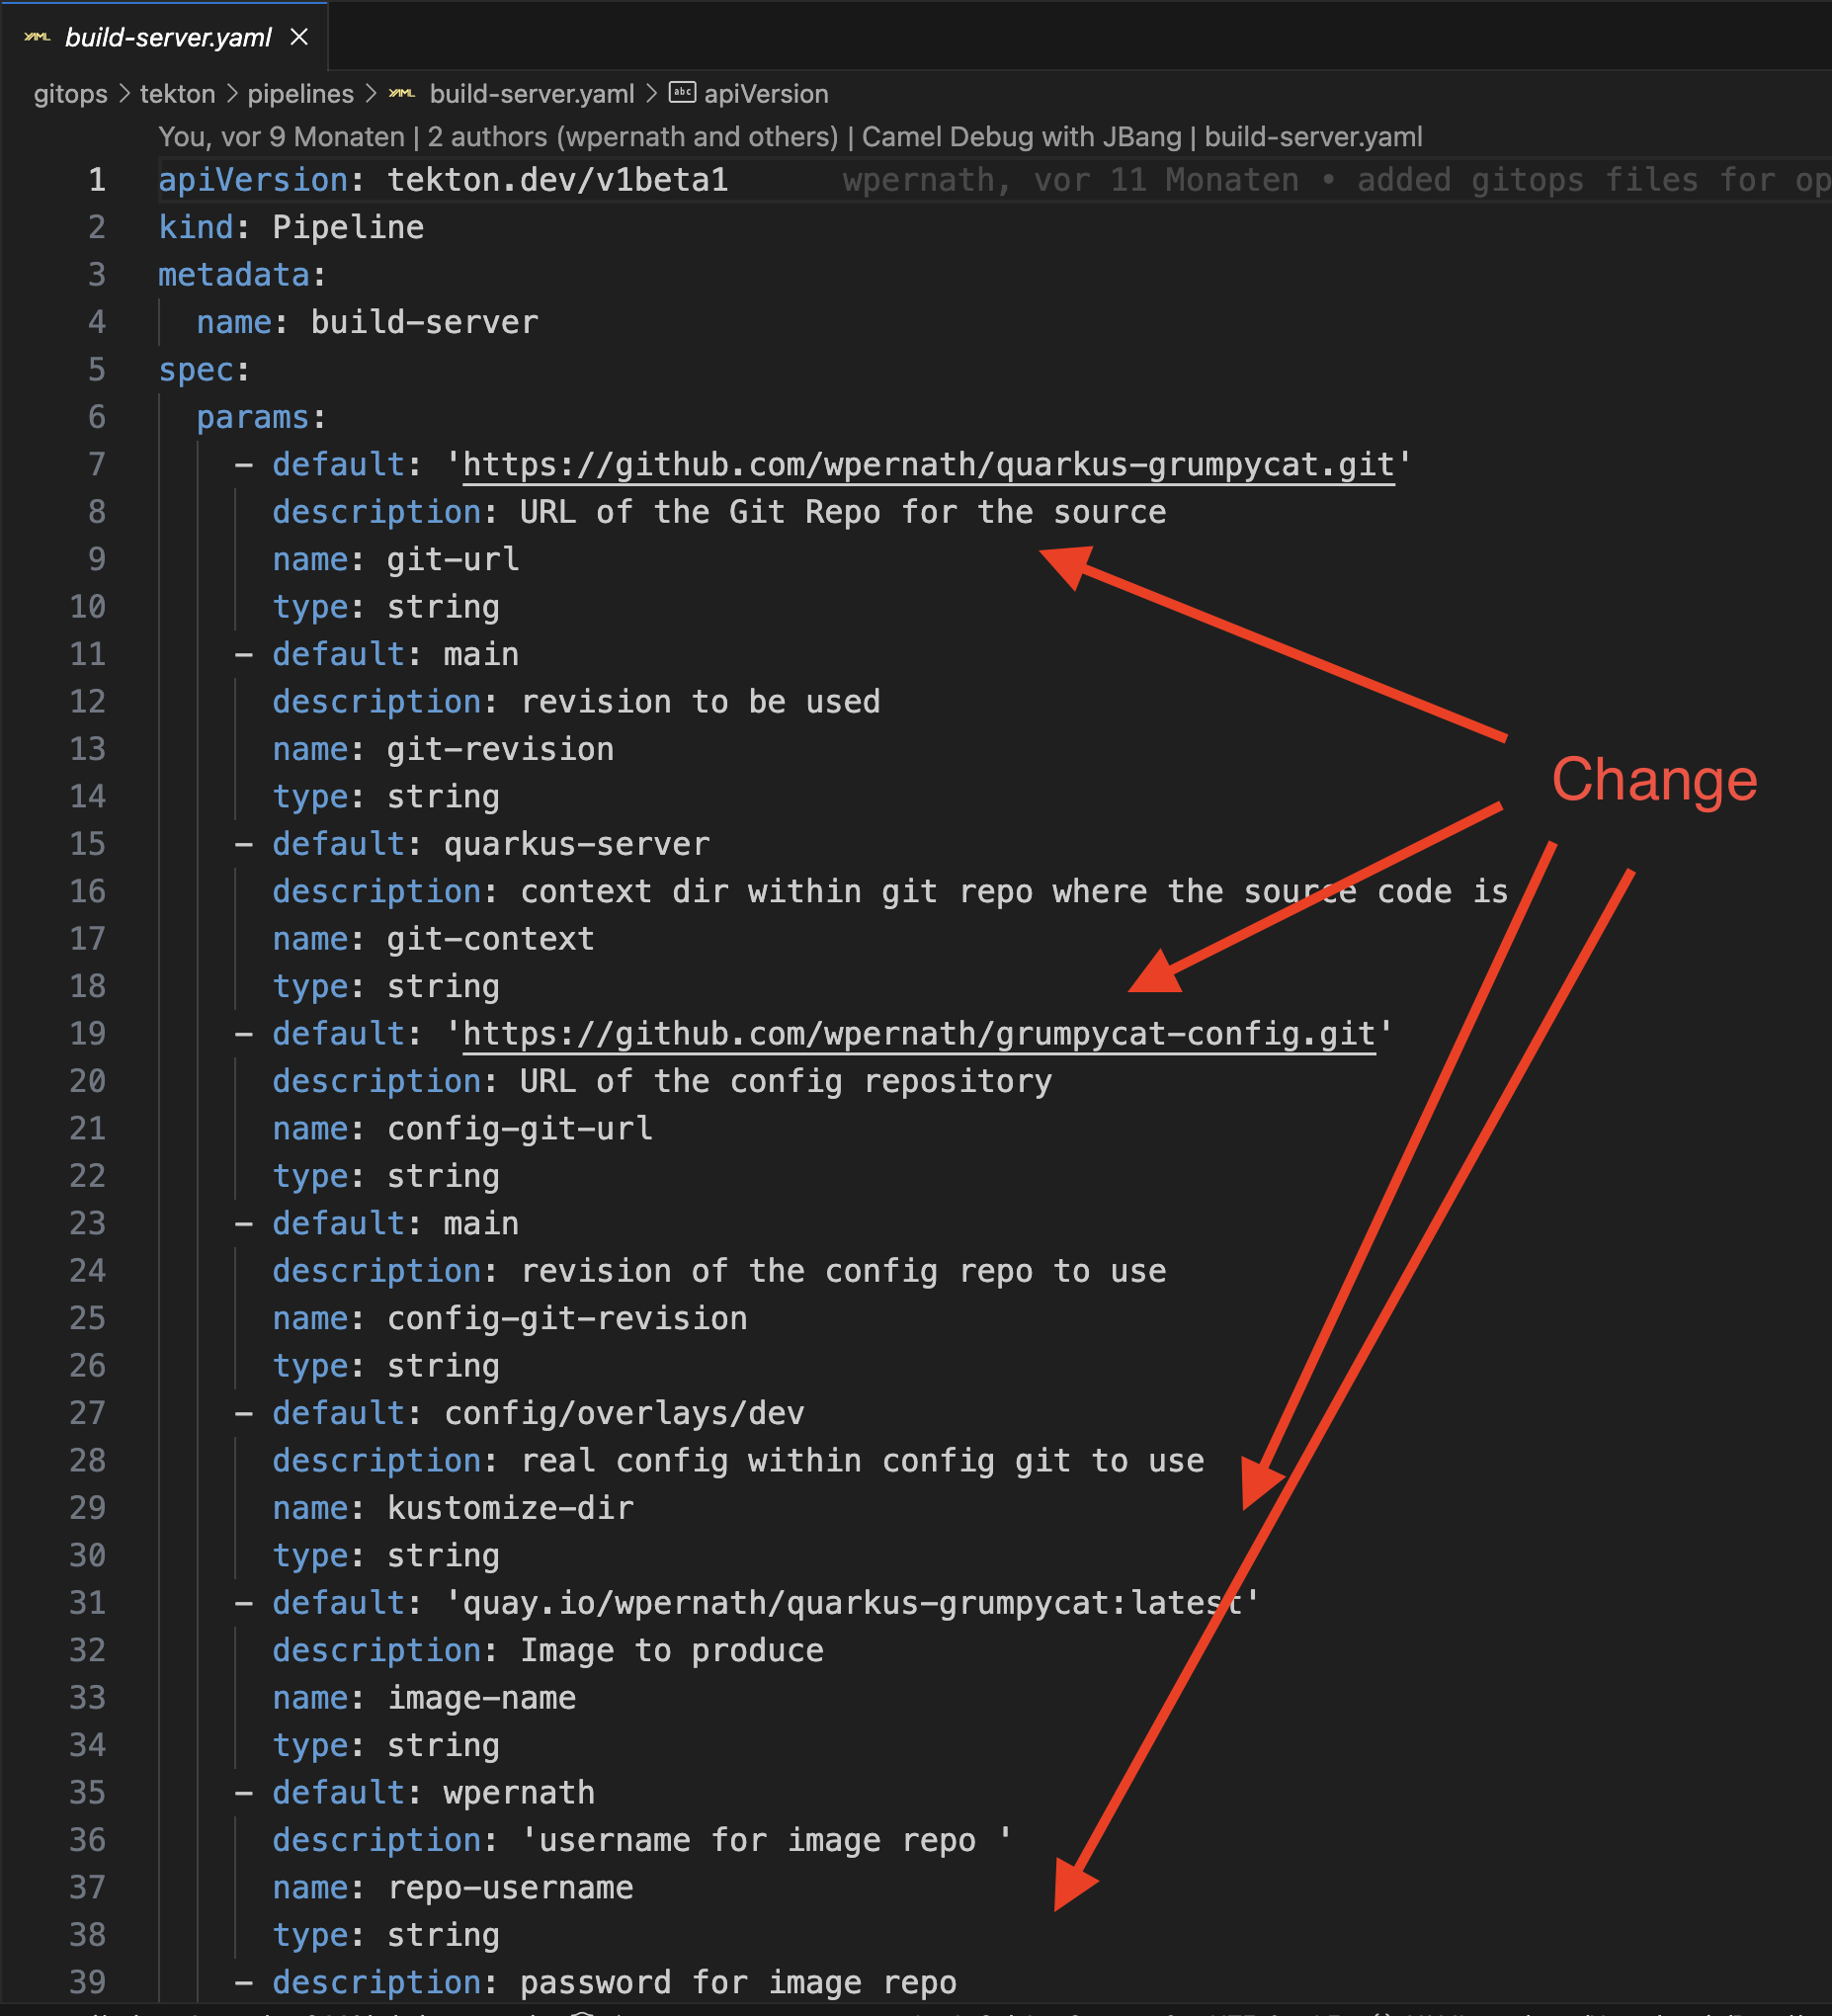 Figure #2: Change those parameters in the pipelines build-server and build-client